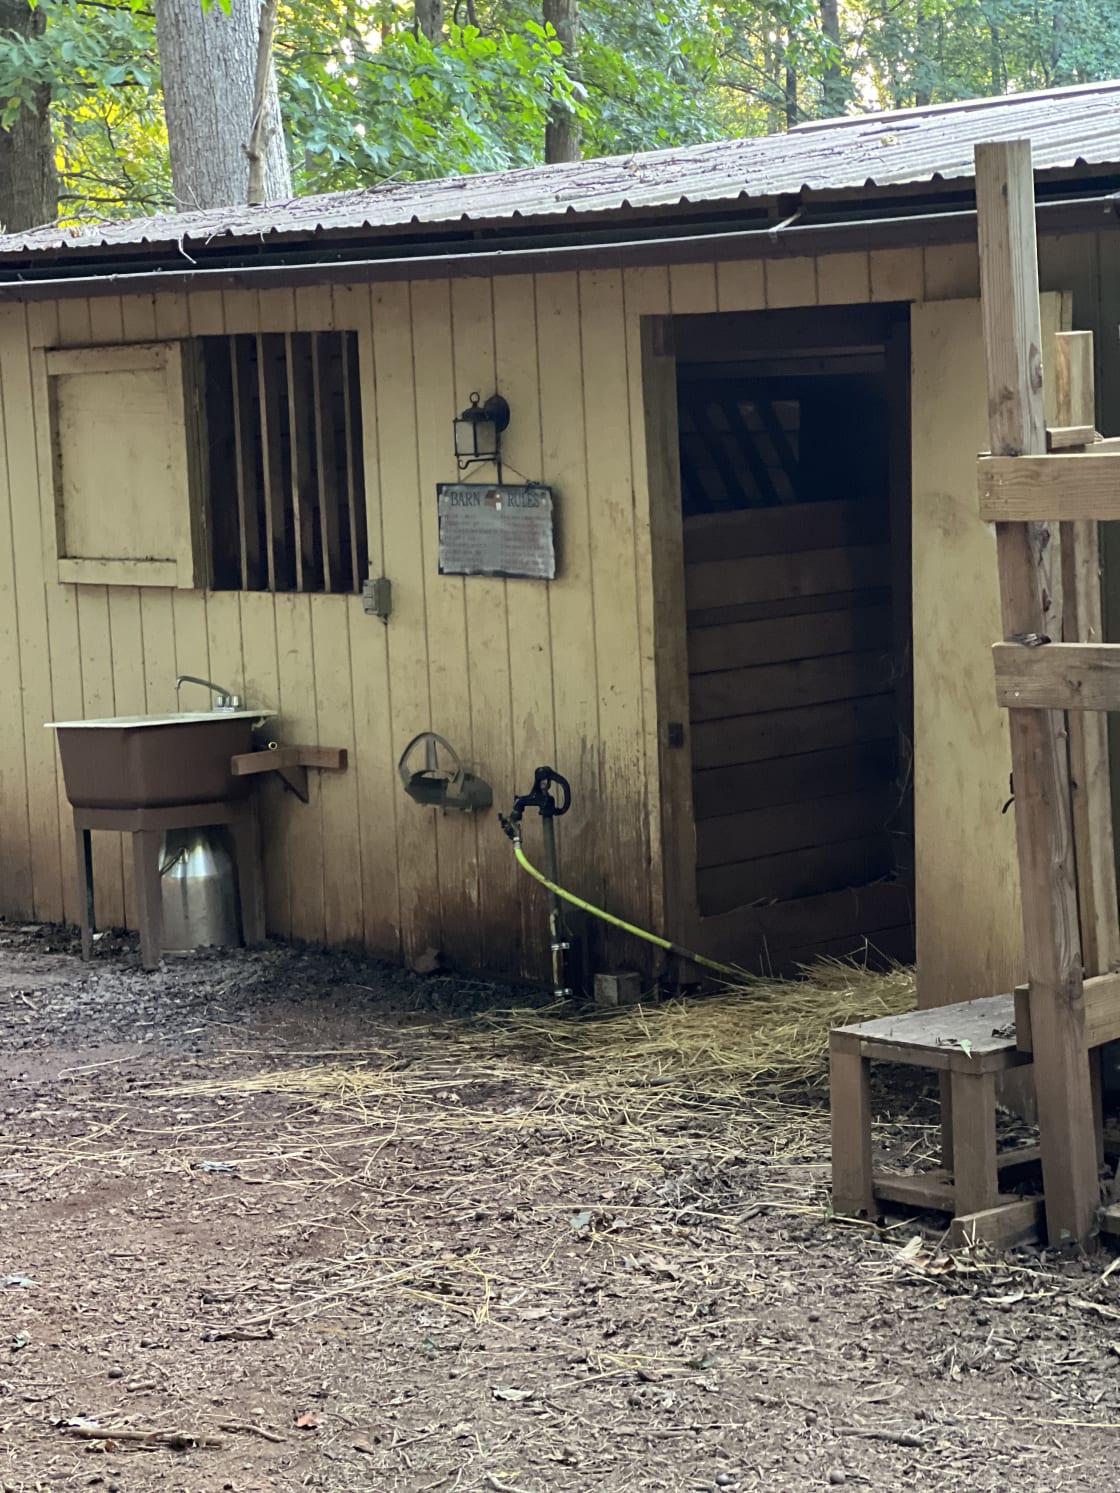 Barn with electricity and water spigot